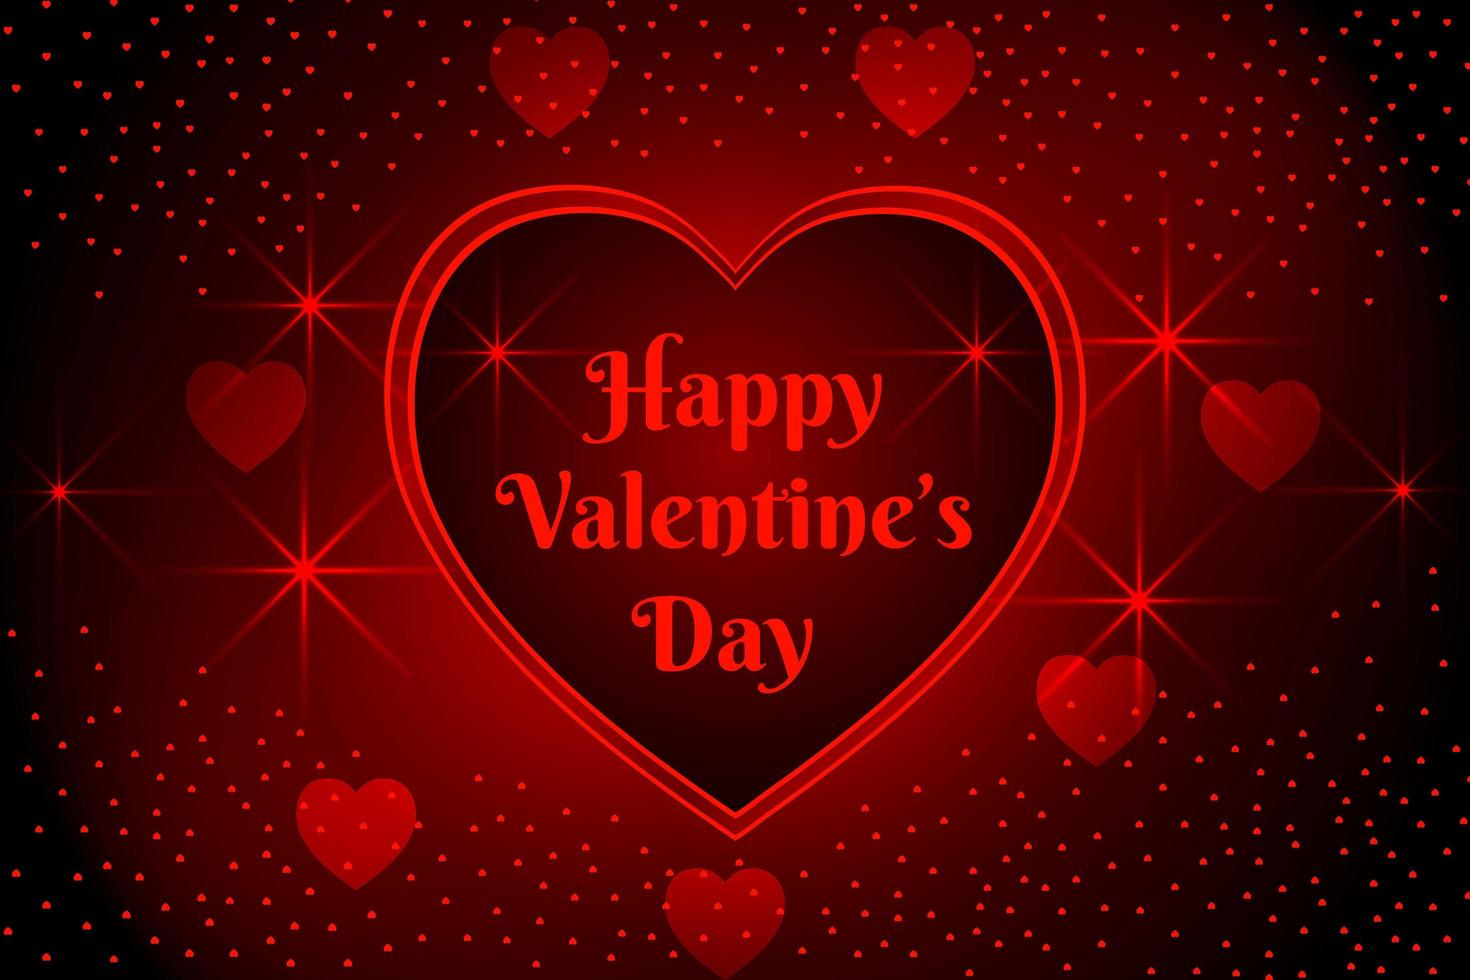 Happy valentine's day hearts and lights design 695874 Vector Art ...